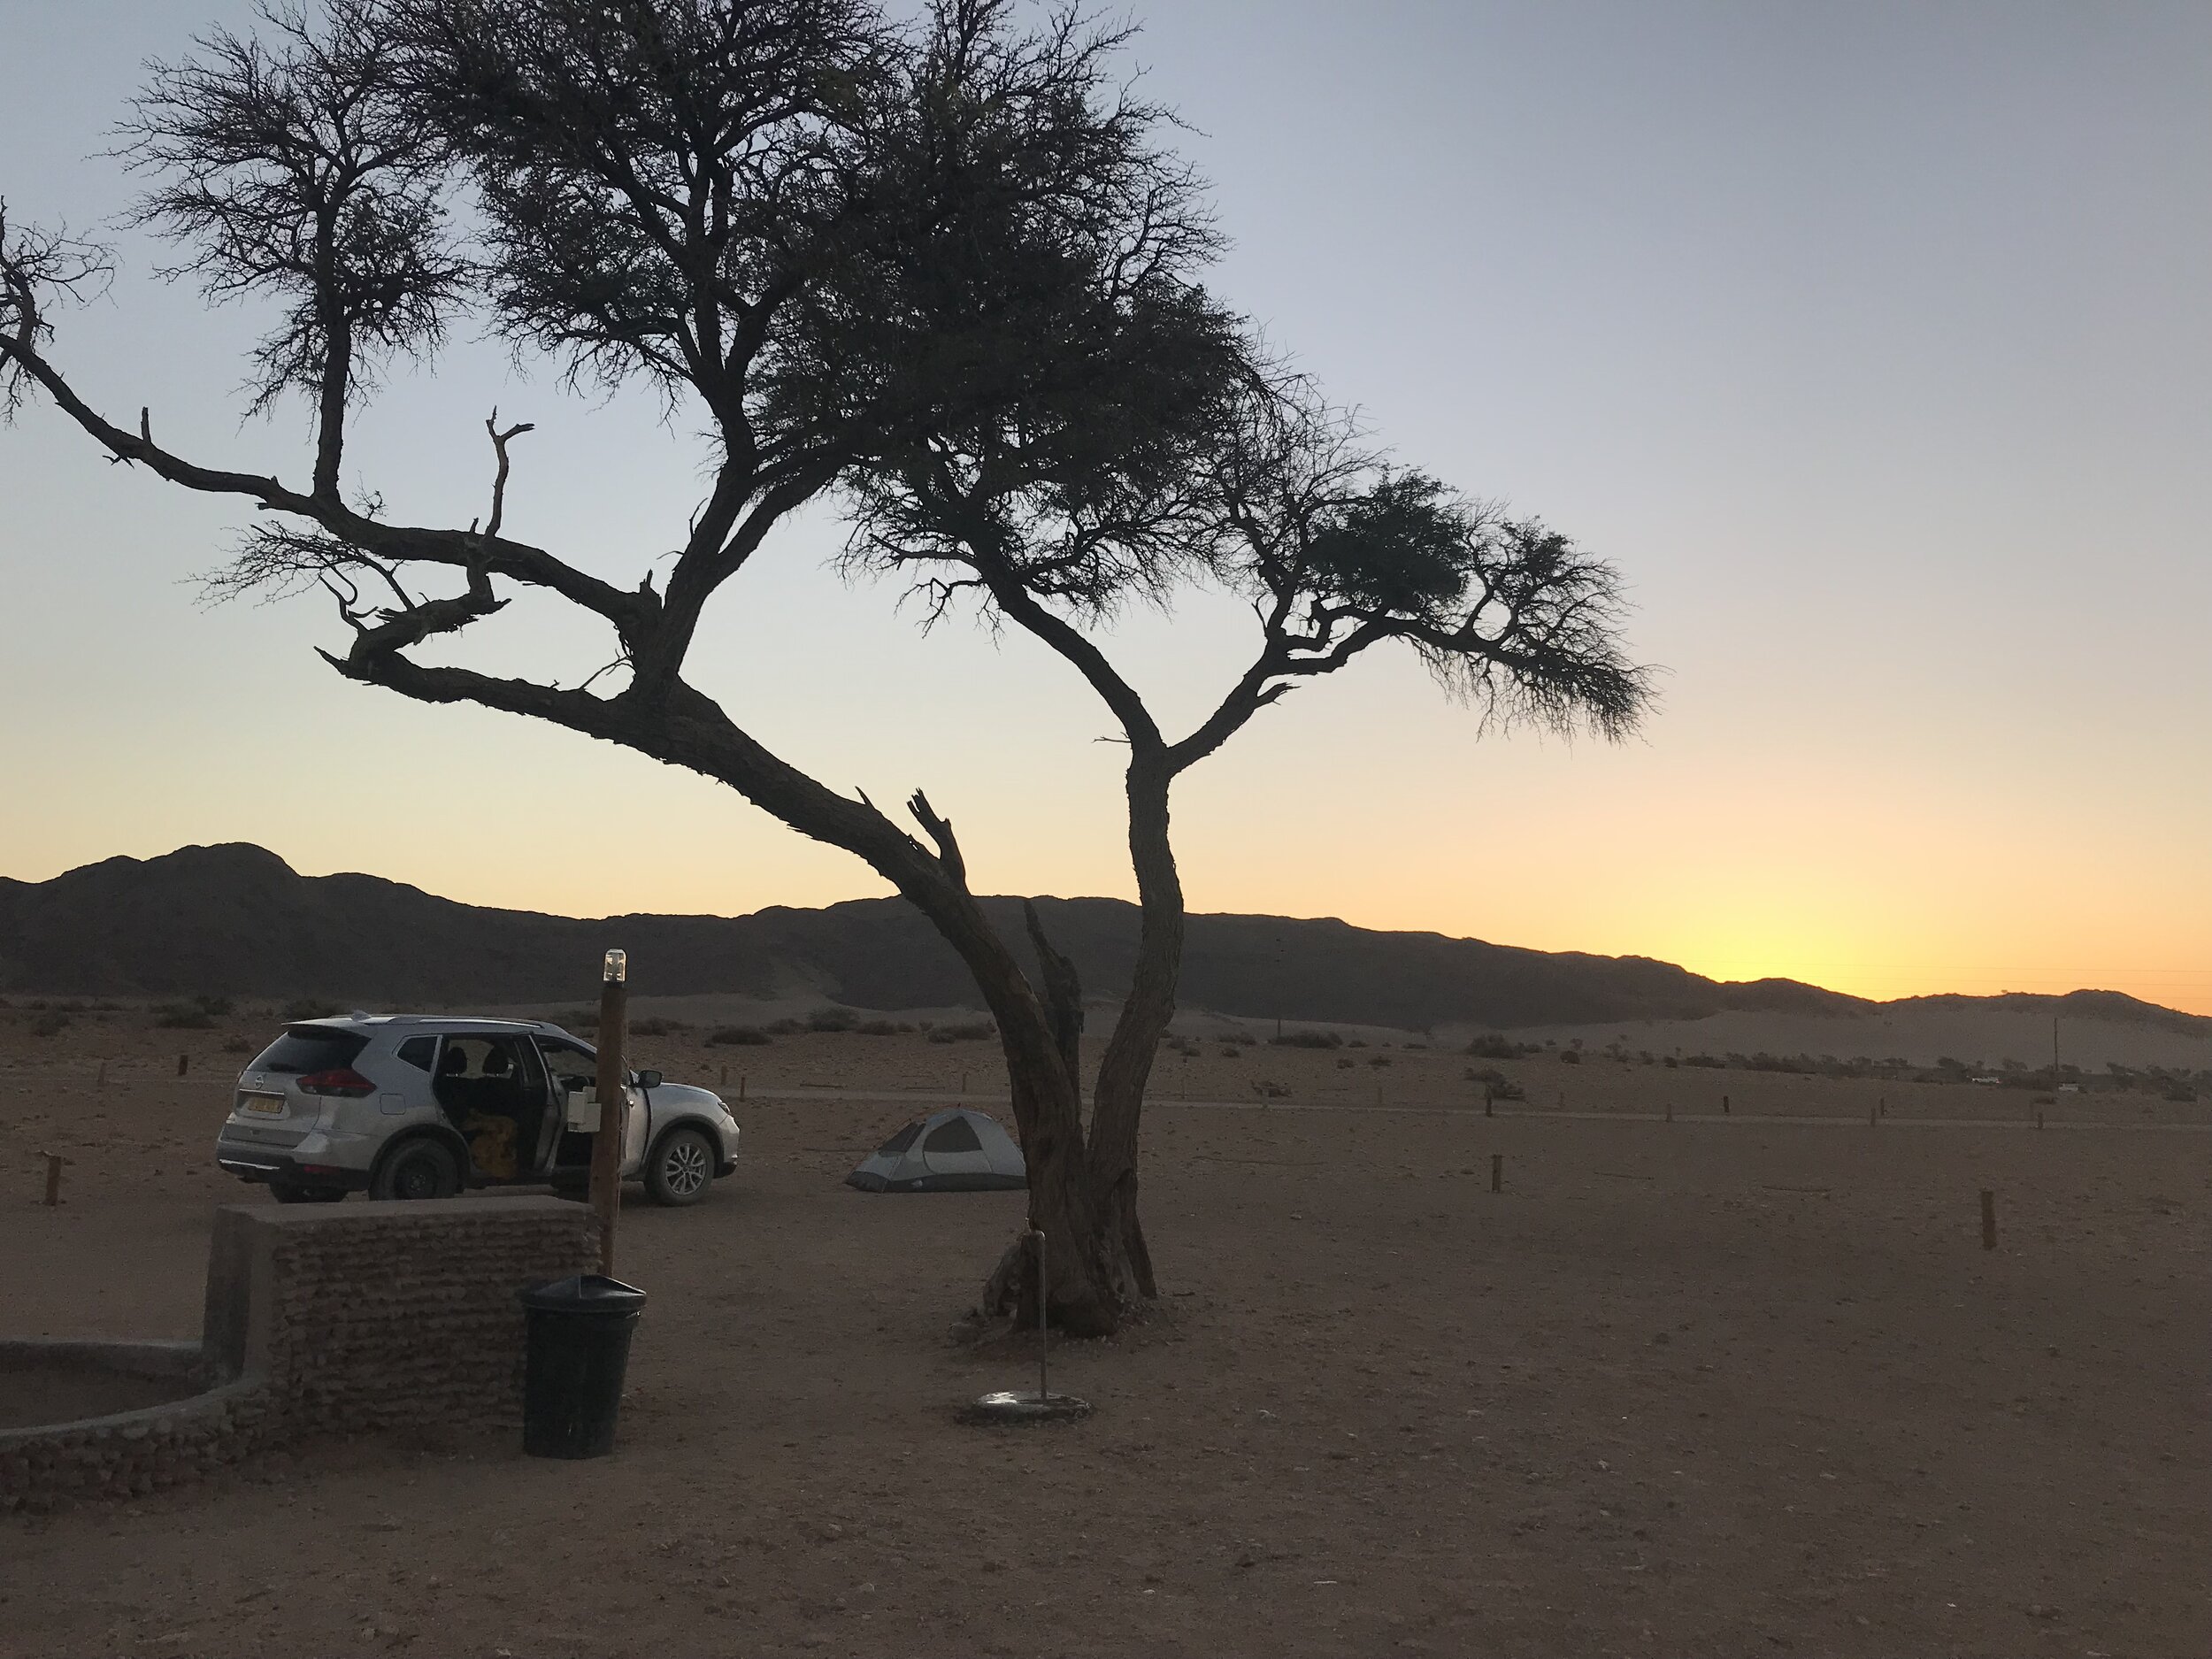 PICTURED: The view of the sun setting behind the dunes from my camp at the “primitive” option at Sossusvlei rest camp.